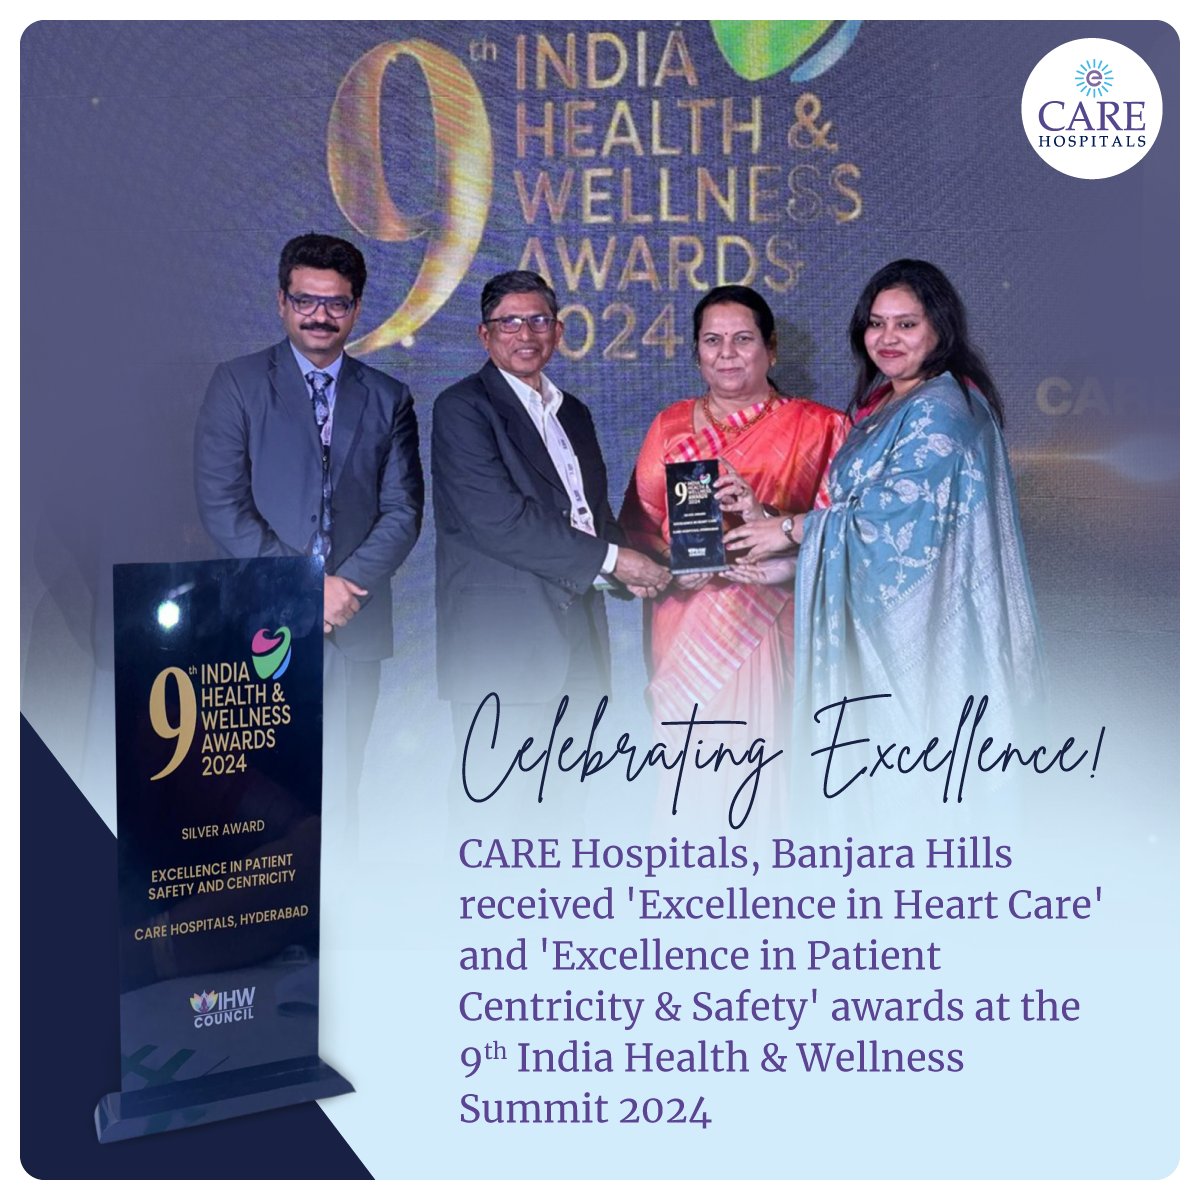 CARE Hospitals, Banjara Hills, Hyderabad received 'Excellence in Heart Care' and 'Excellence in Patient Centricity & Safety' awards at the 9th India Health & Wellness Summit 2024. 
#CAREHospitals #TransformingHealthcare #ExcellenceInHeartCare #IndianHealthAndWellnessCouncil